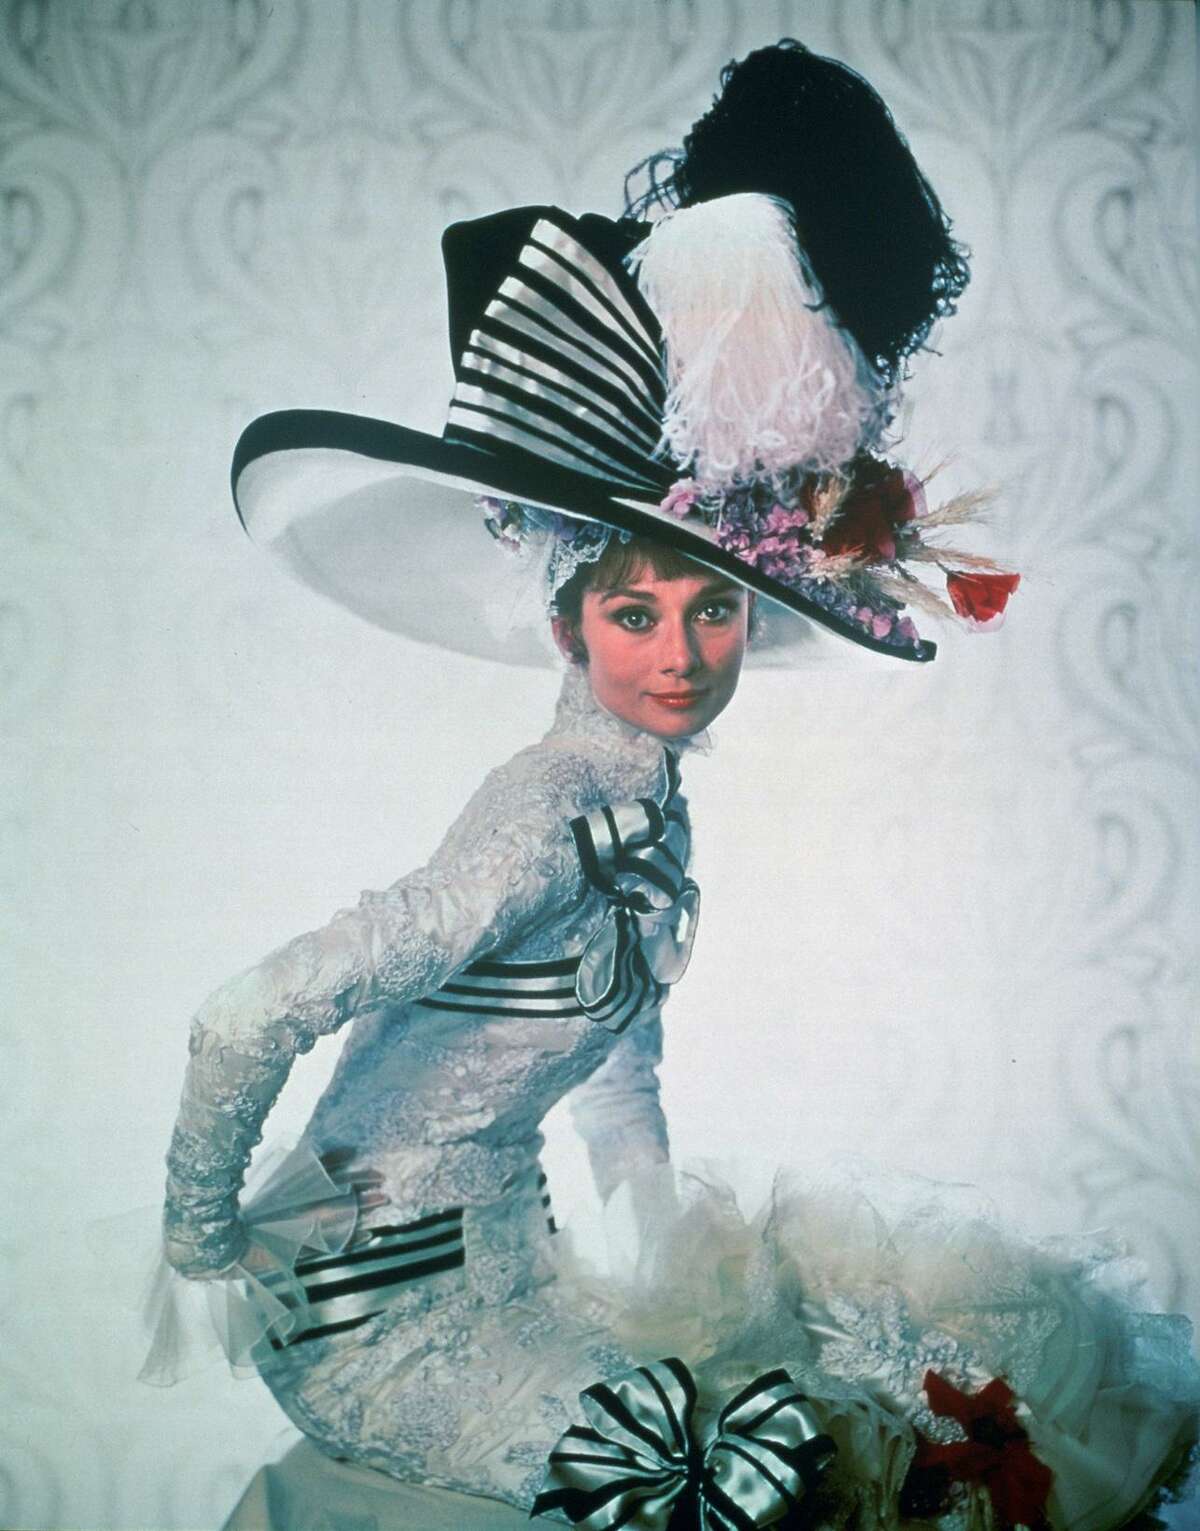 ON BIG SCREEN: Audrey Hepburn and “My Fair Lady” will be back on select theater screens, including Branford 12, Conn. Post 14 in Milford and Cinemark North Haven, on Feb. 17 and Feb. 20, according to Fathom Events. Call the theater for times.